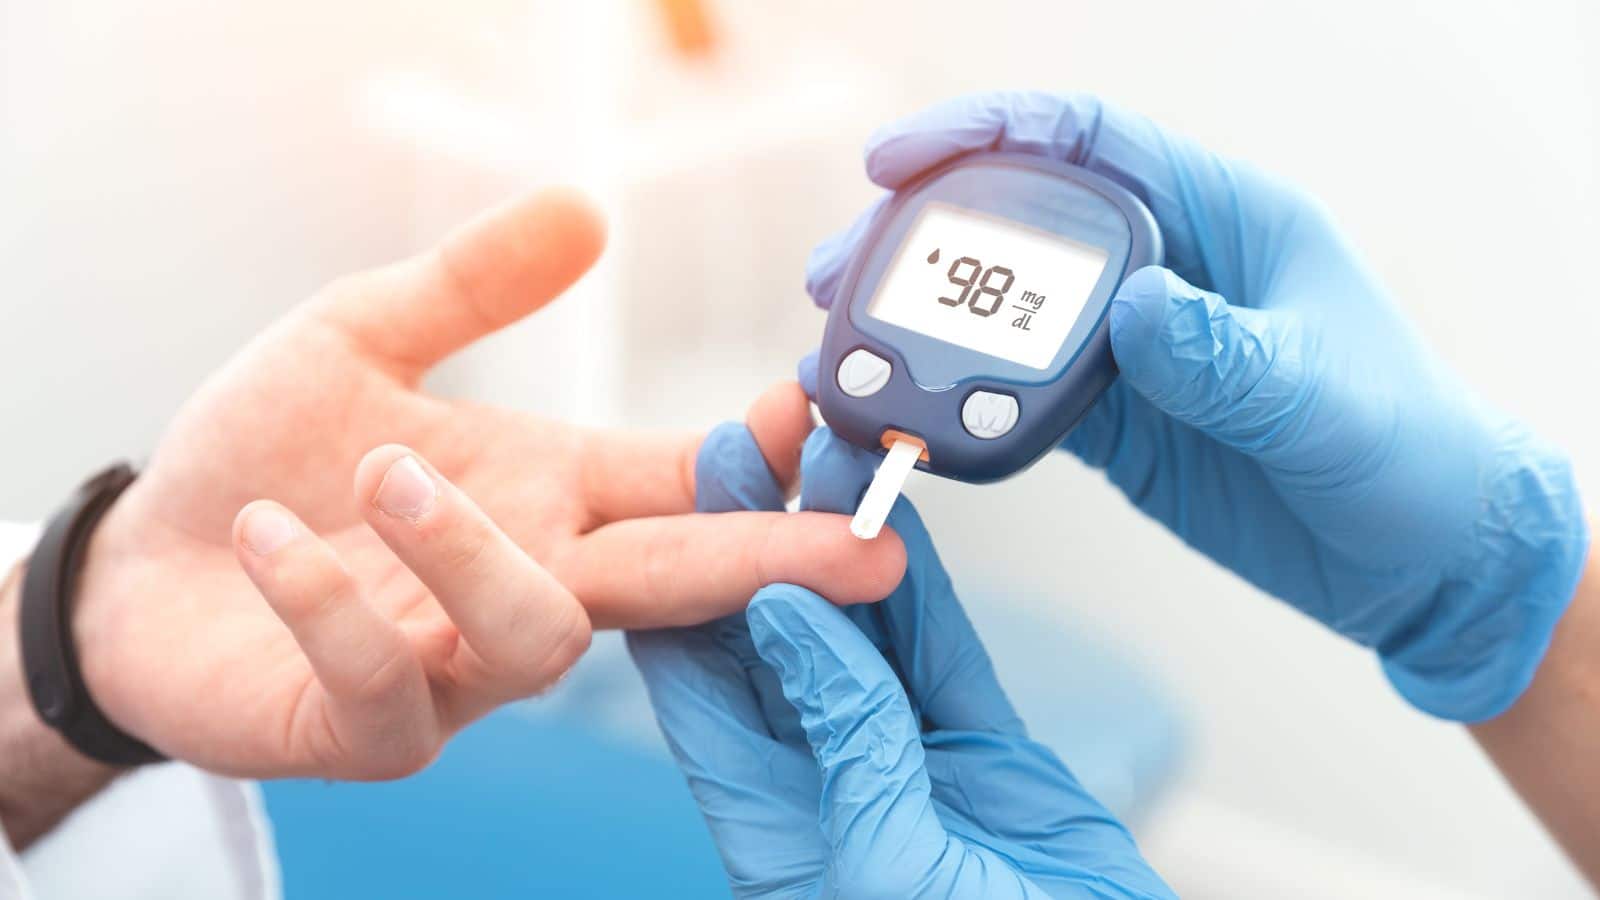 Man taking blood sugar with a glucometer.
